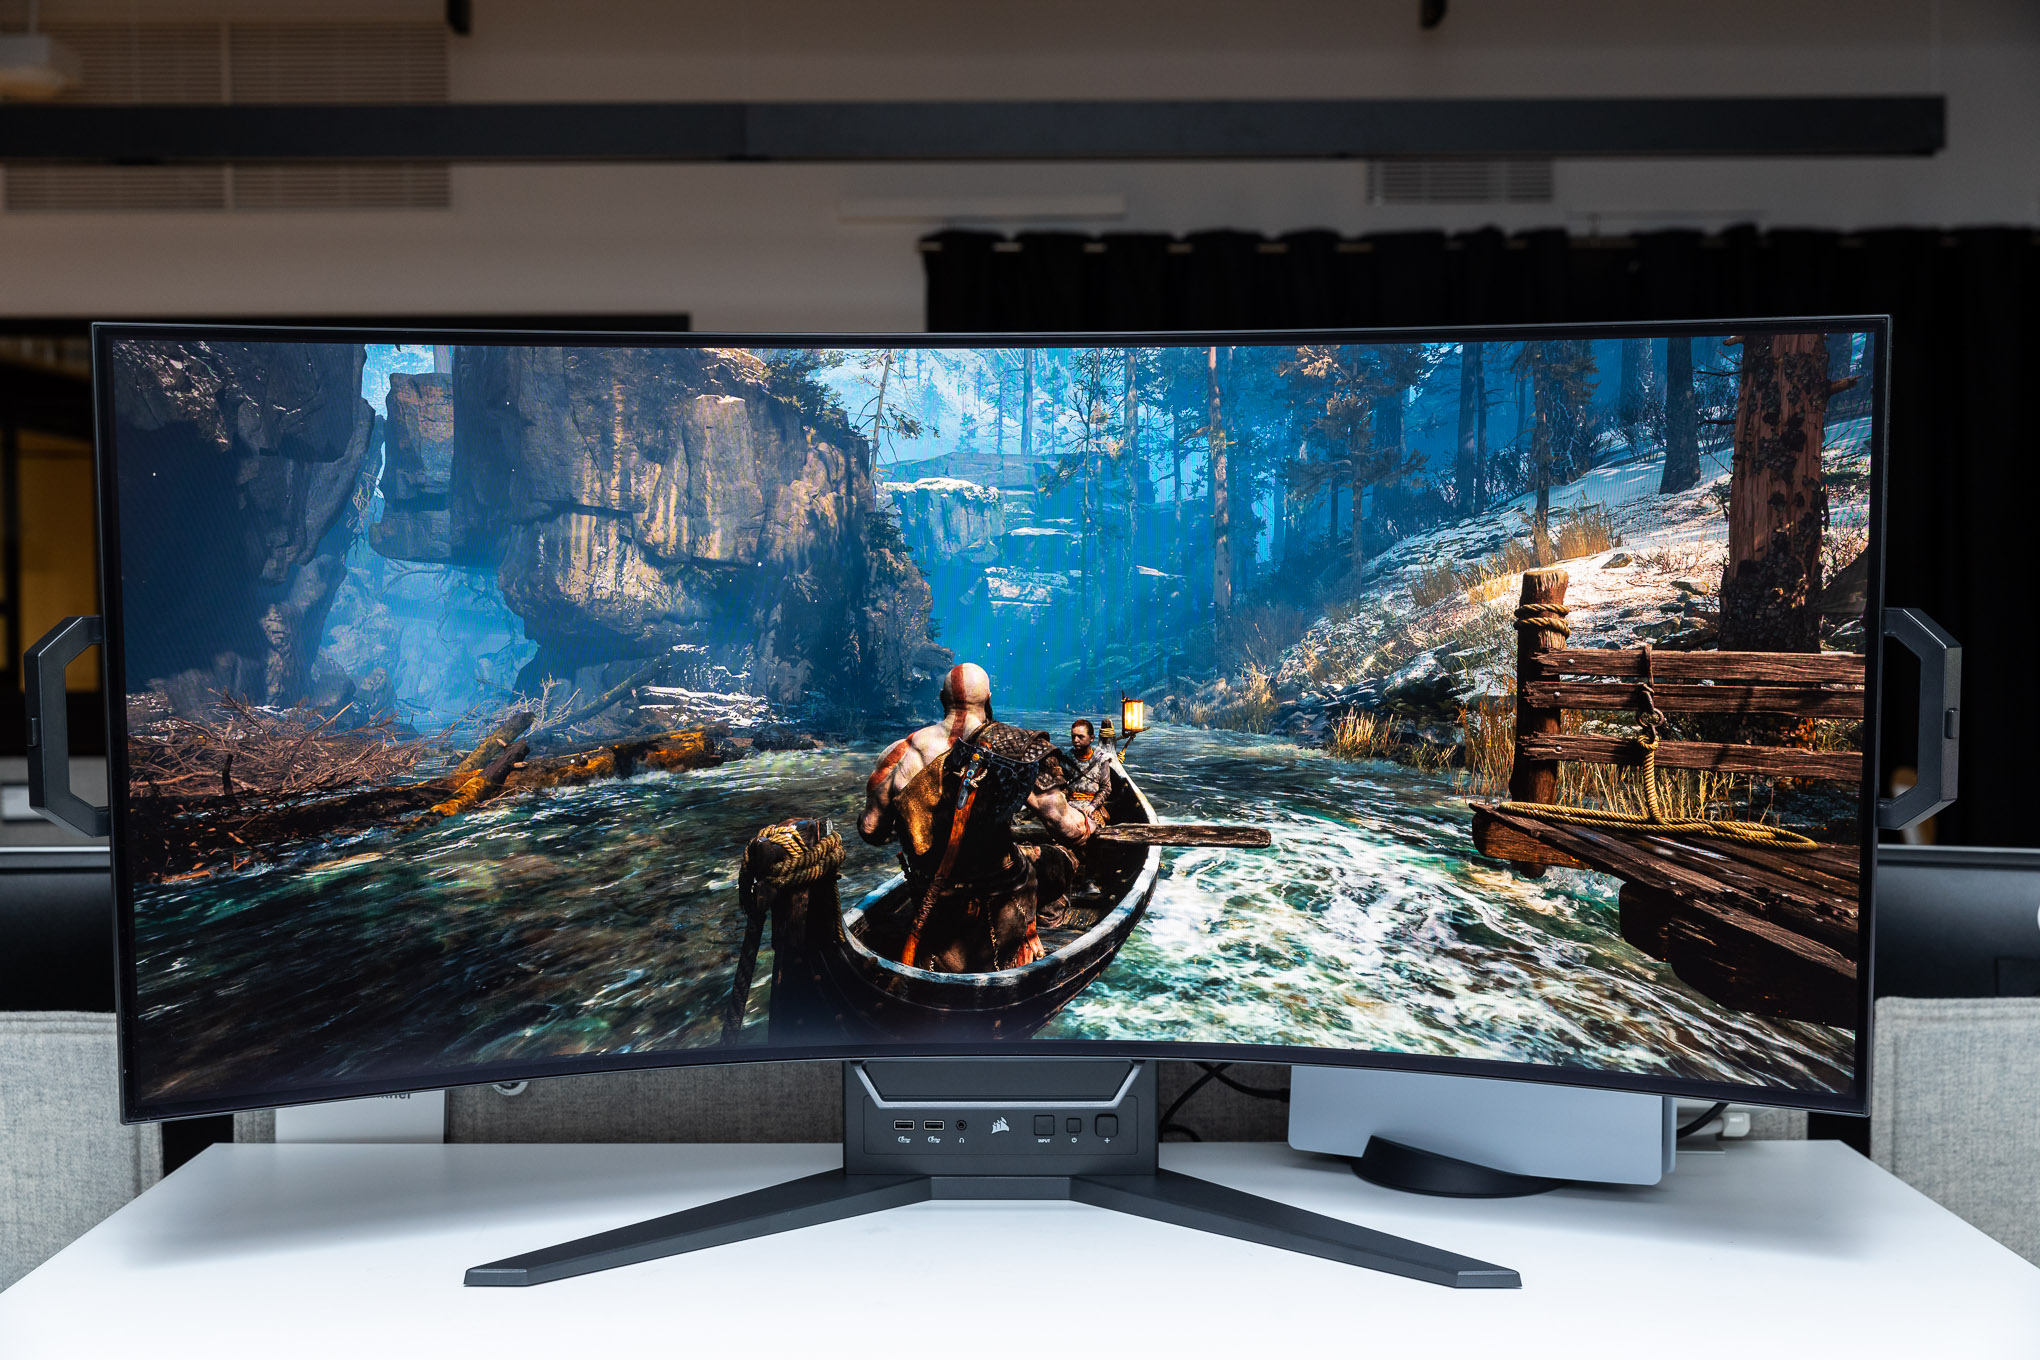 The Xeneon Flex in its curved orientation showing off God of War on PC